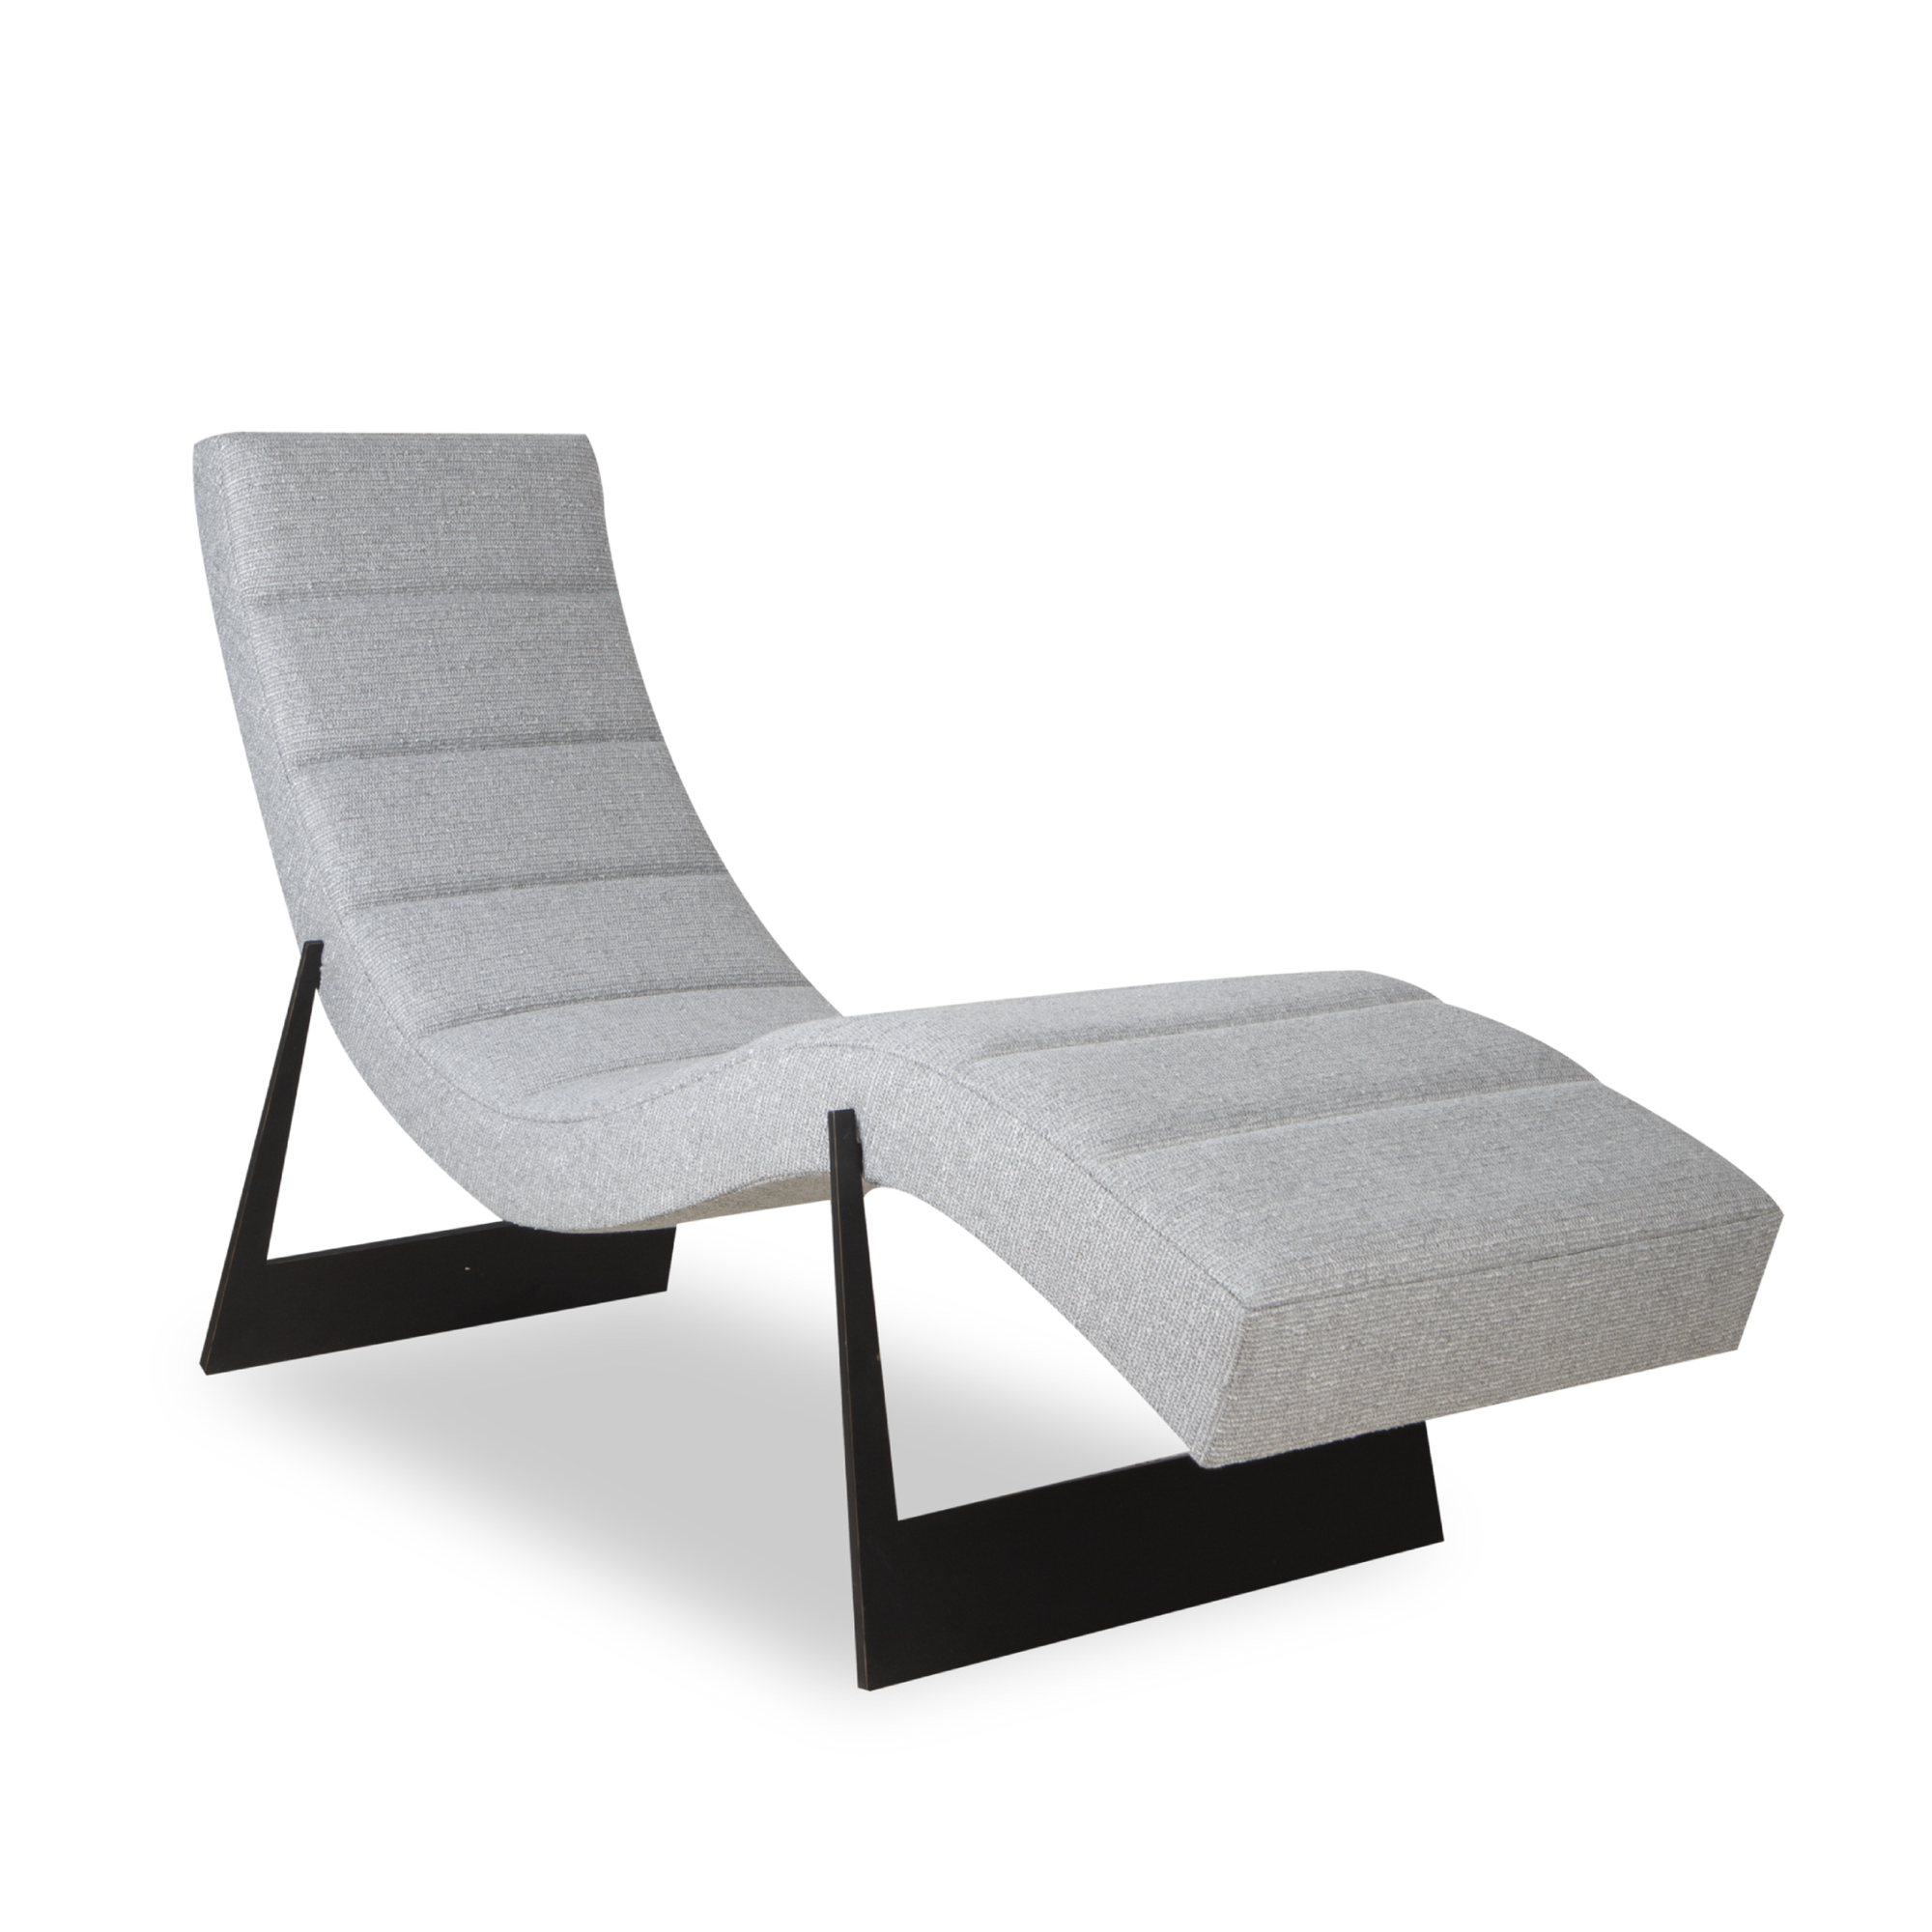 Blurring the lines of art and furniture, the Cleo Chaise's design serves dual purpose as both brutalist sculpture and chaise.